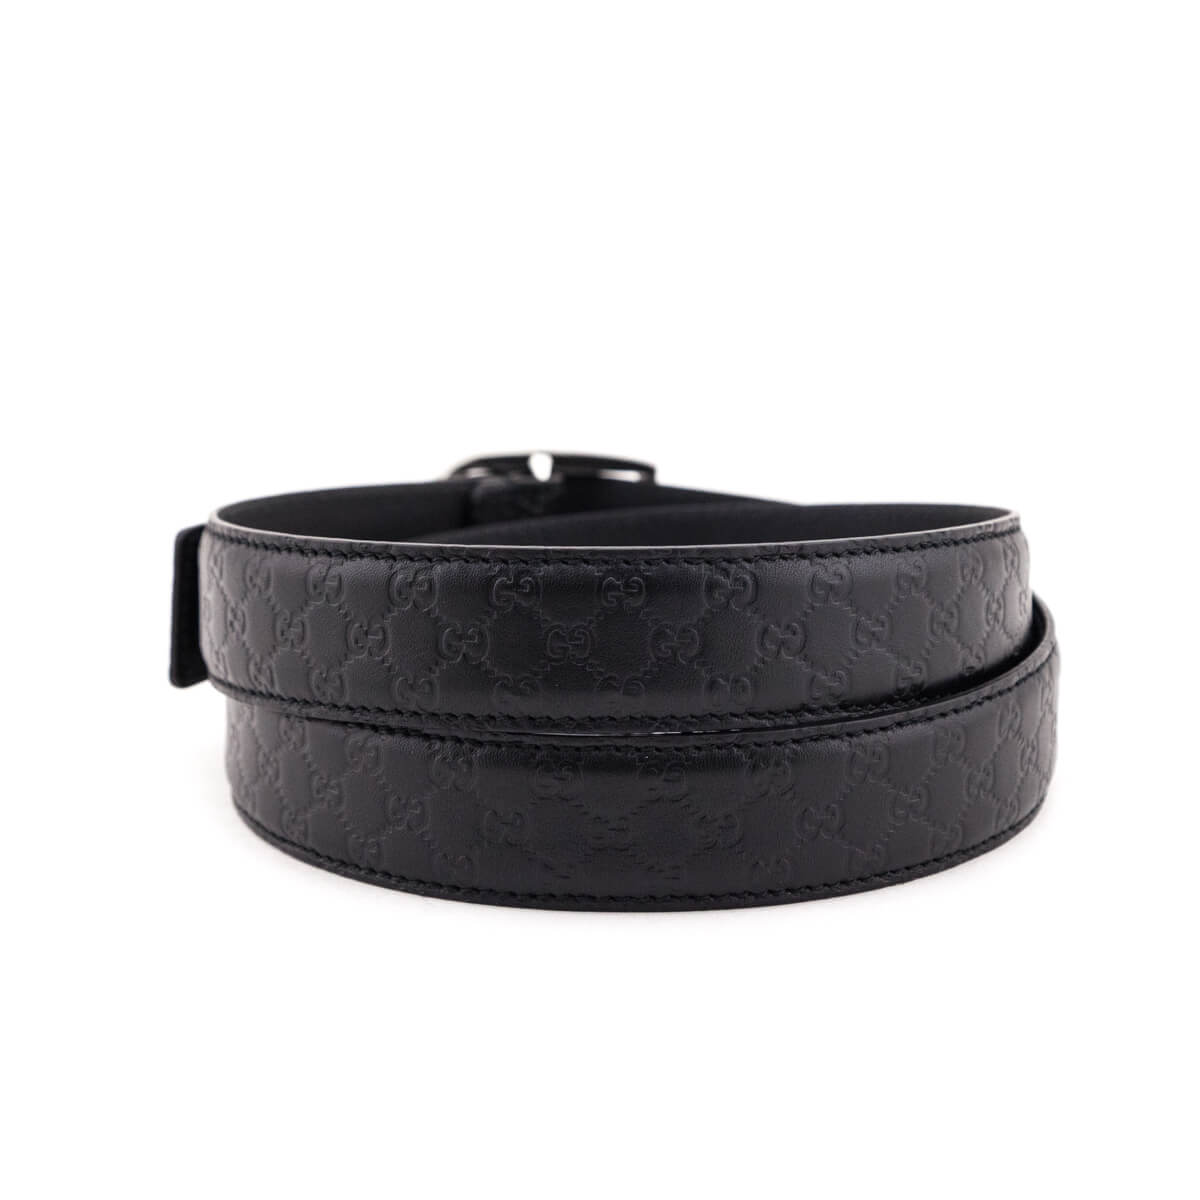 Gucci Black Microguccissima Belt Size XL - Love that Bag etc - Preowned Authentic Designer Handbags & Preloved Fashions